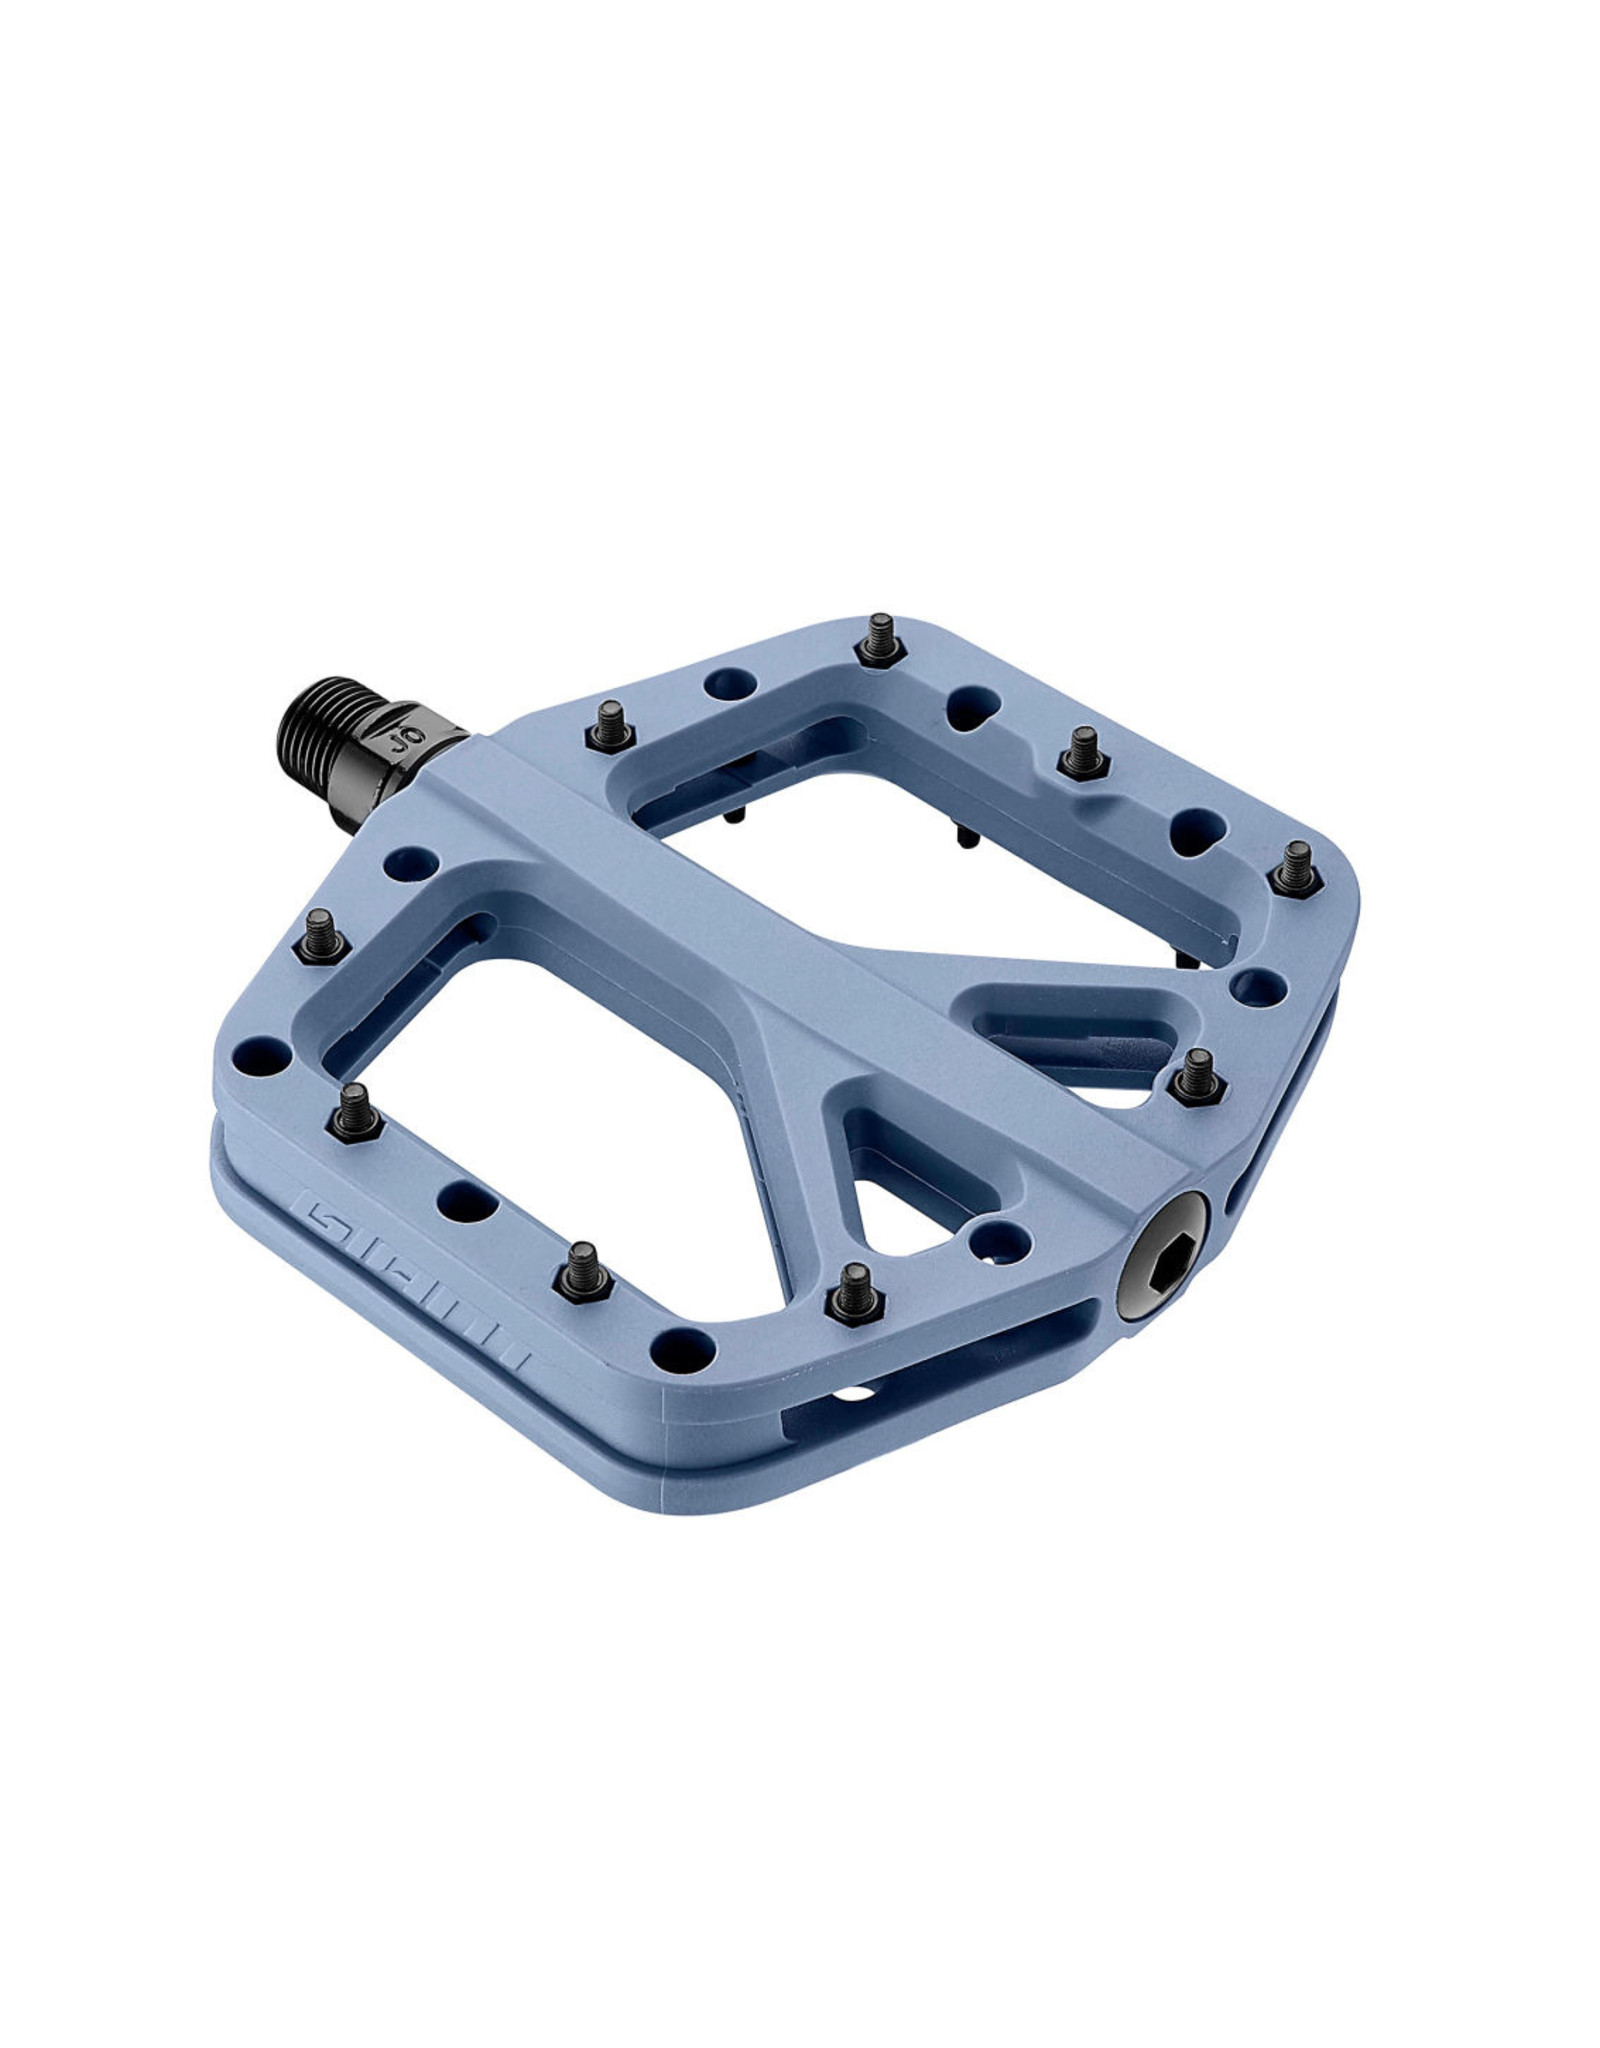 GIANT BICYCLES Pinner Elite Pedal Giant